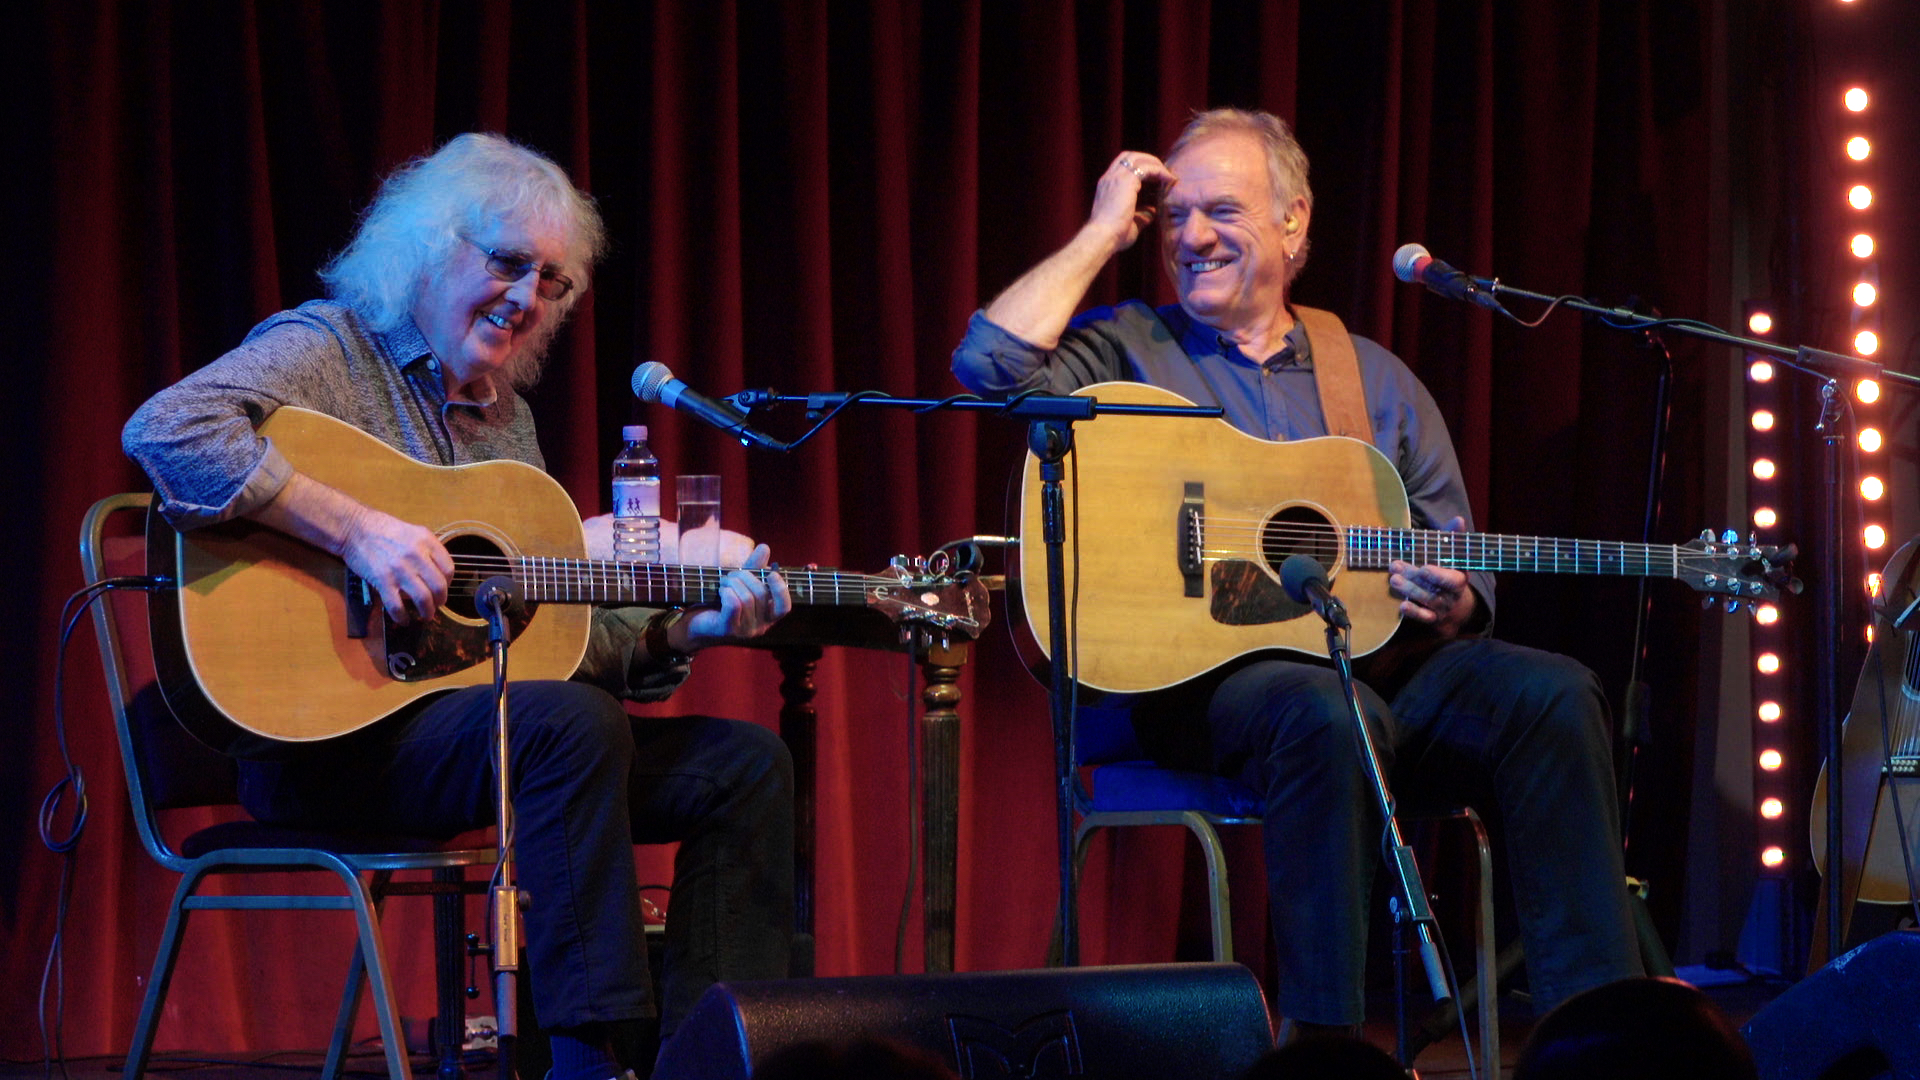 Ralph McTell and Wizz Jones Play Backstage Kinross For Mundell Music